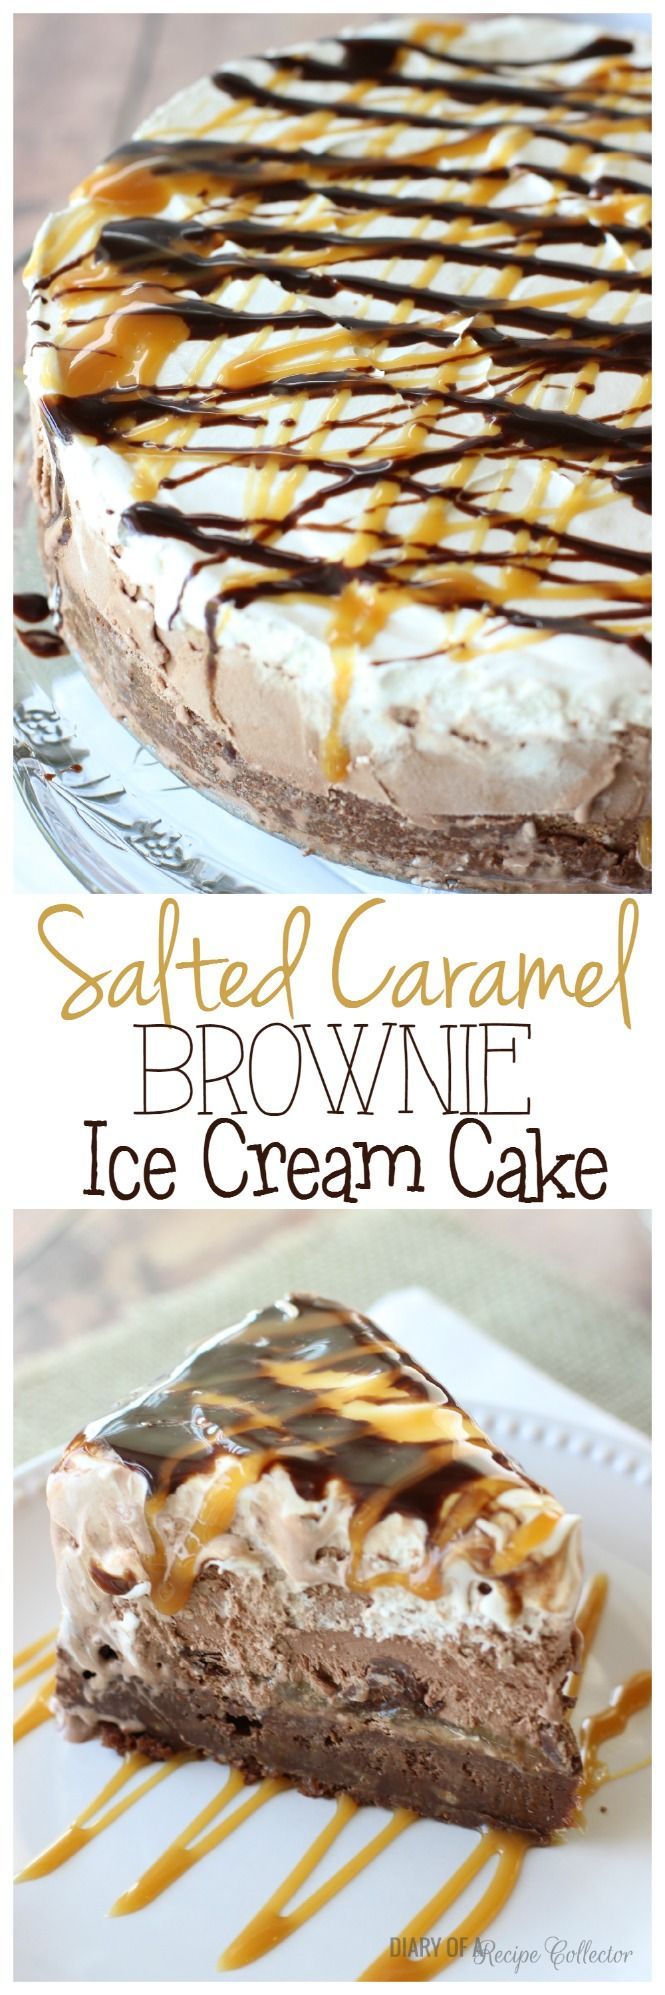 Salted Caramel Brownie Ice Cream Cake – Layers of rich brownie filled with toffee, salted caramel, dark chocolate truffles,